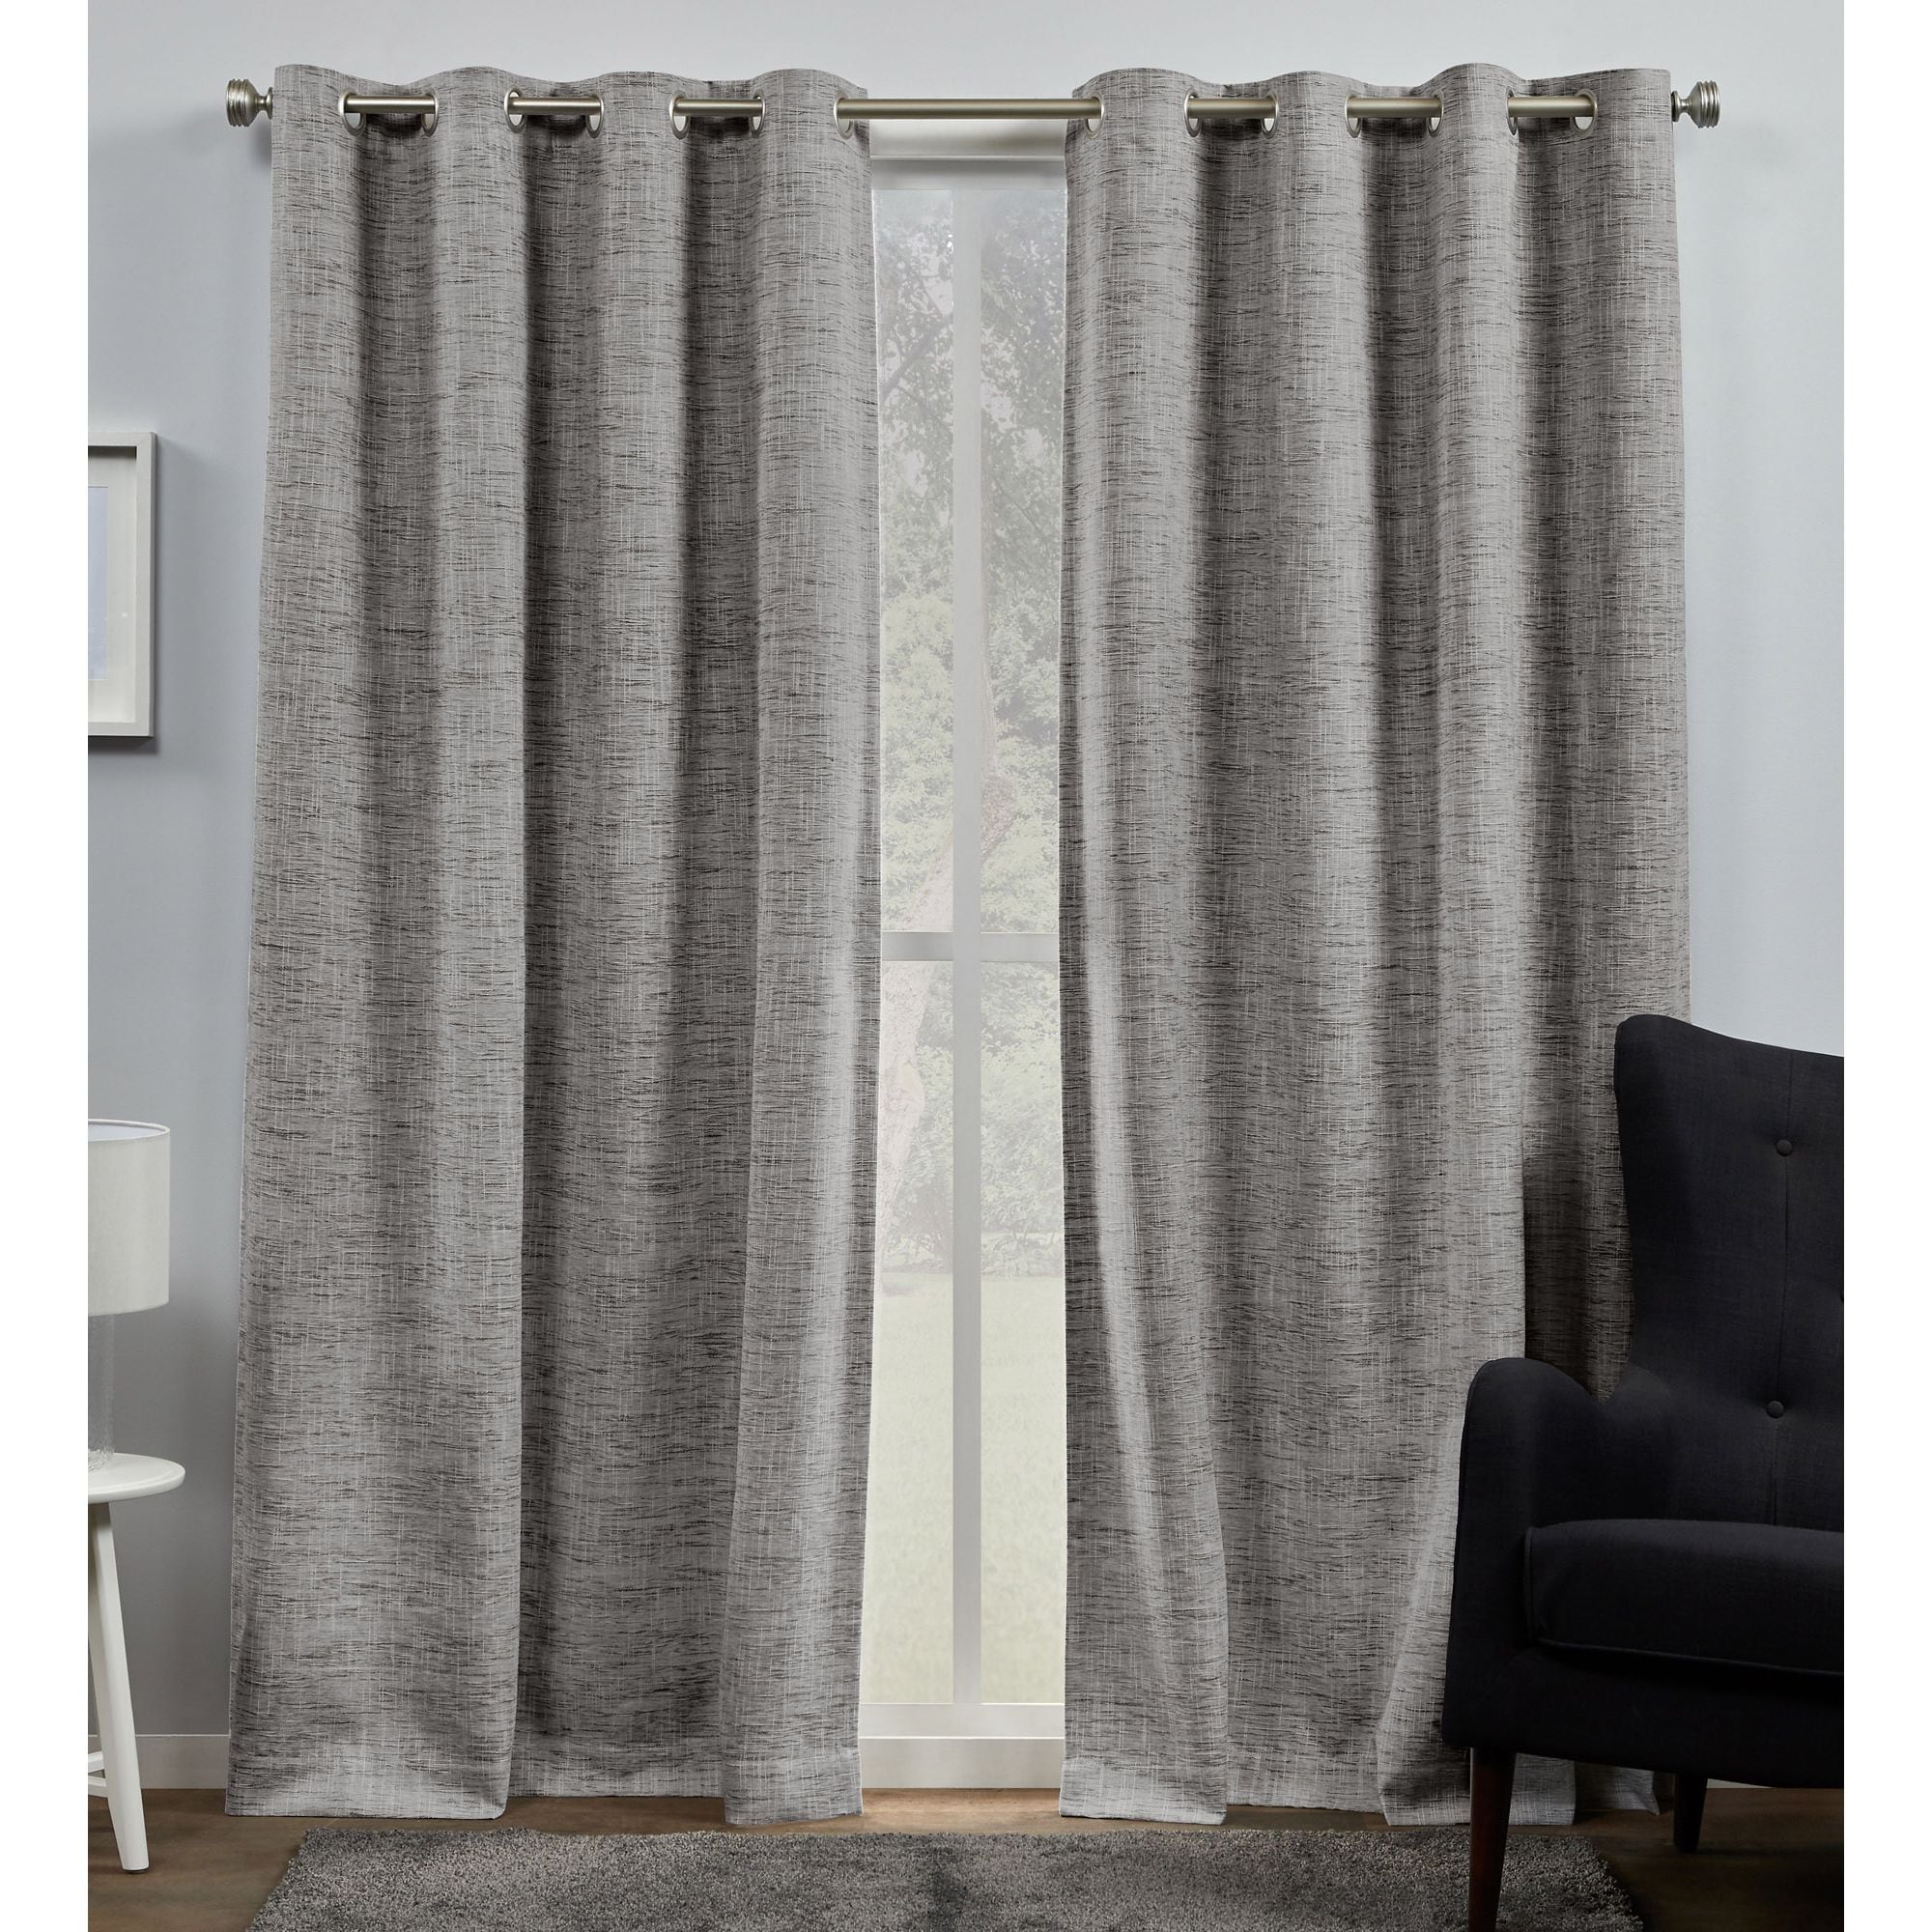 LUXURY DESIGNER THERMAL BLACKOUT LINED CURTAINS PAIR EYELET RING TOP ~ 4 SIZES 